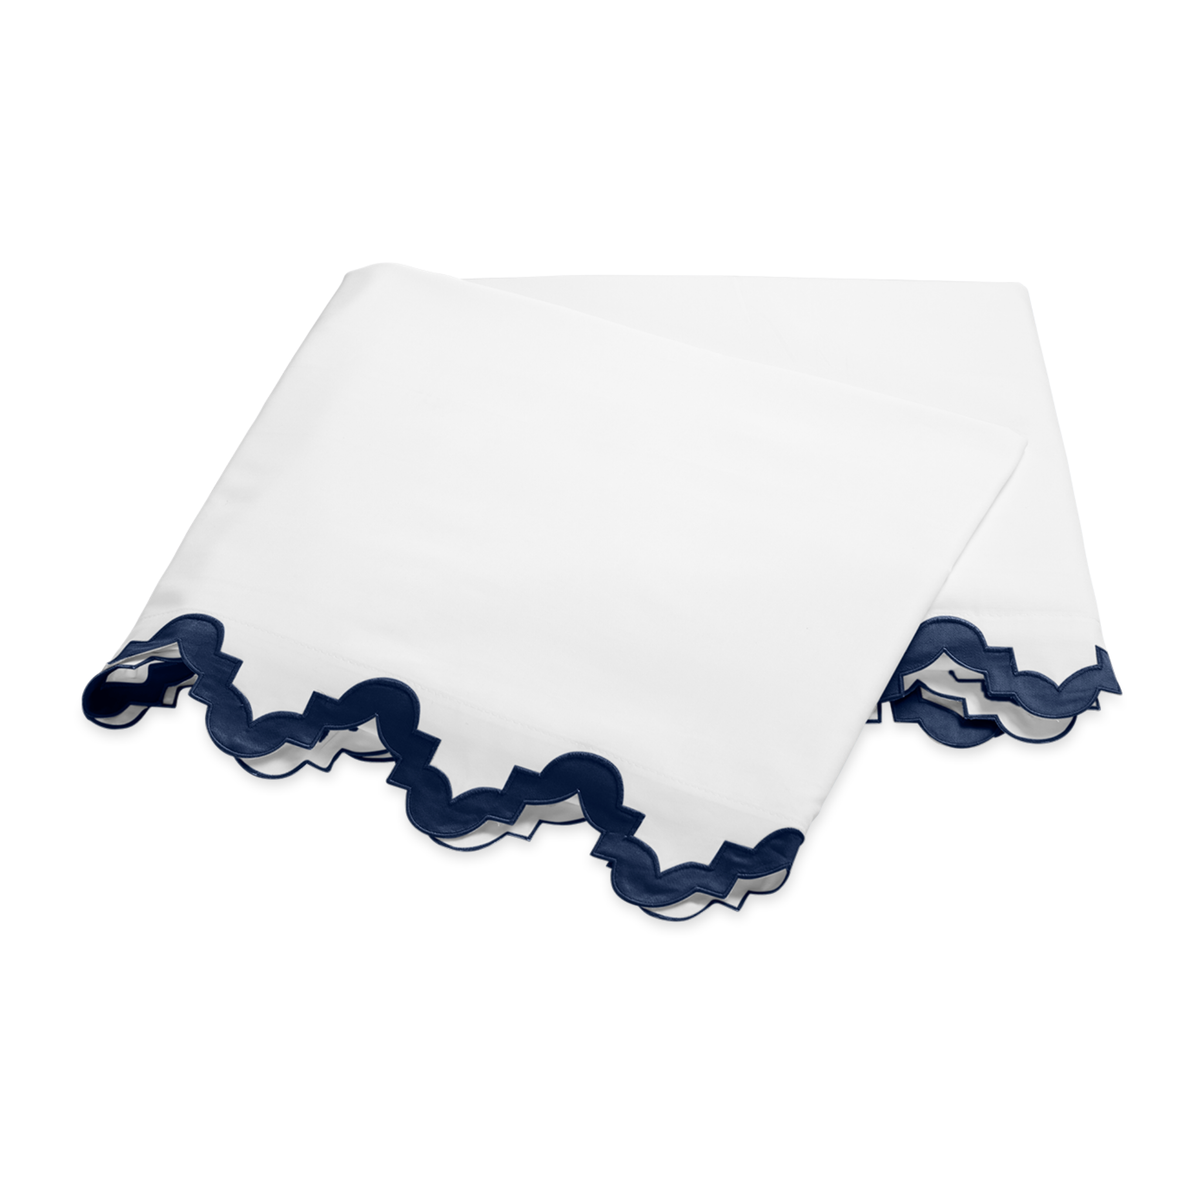 Folded Flat Sheet of Matouk Aziza Bedding in Navy Color